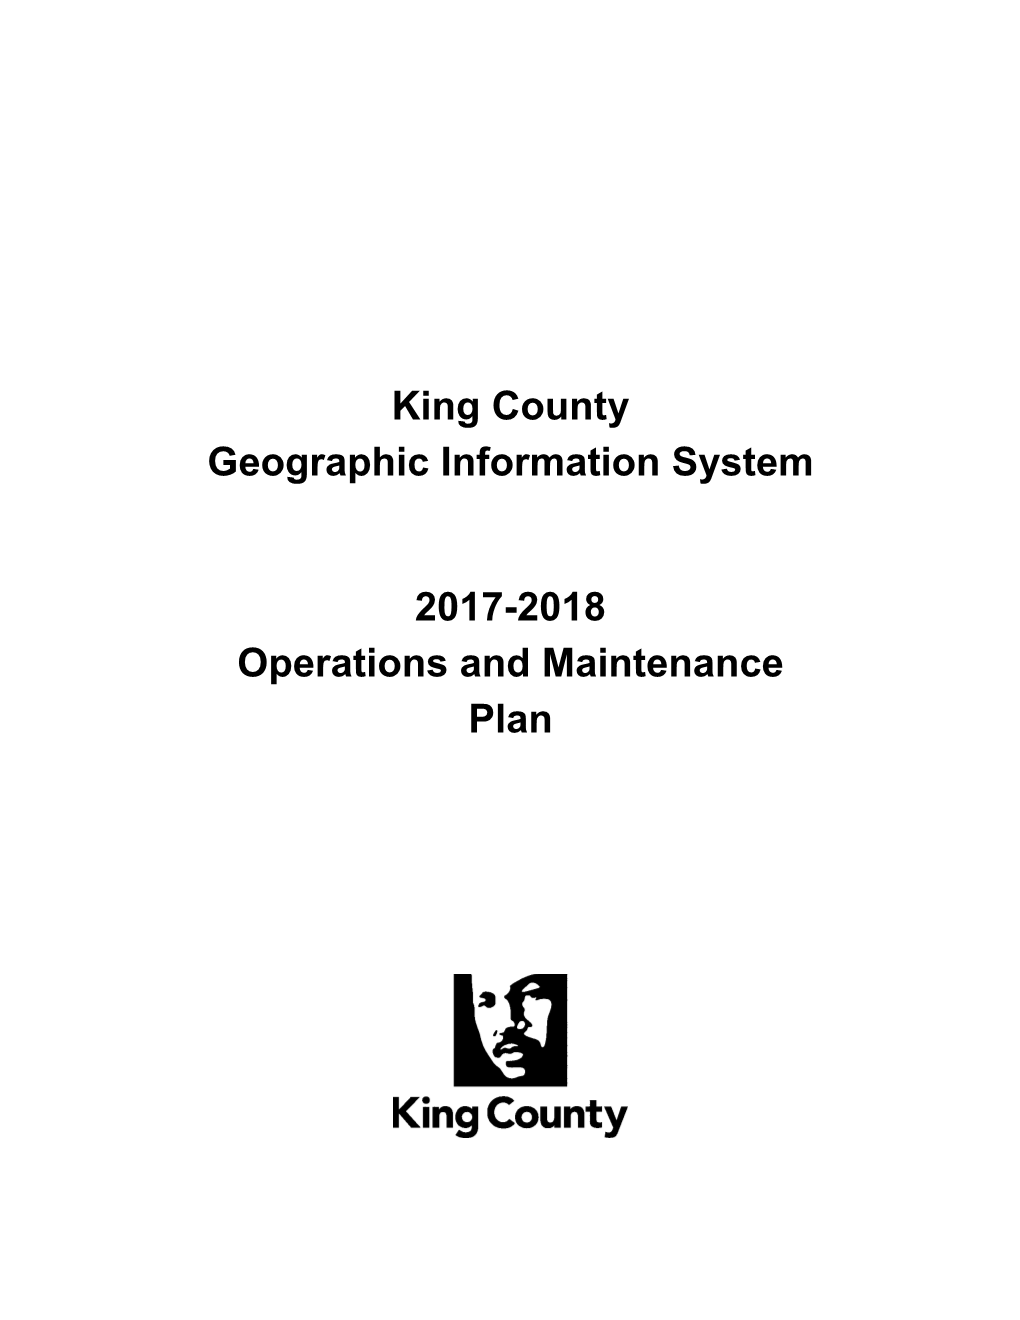 2017-2018 Operations and Maintenance Plan